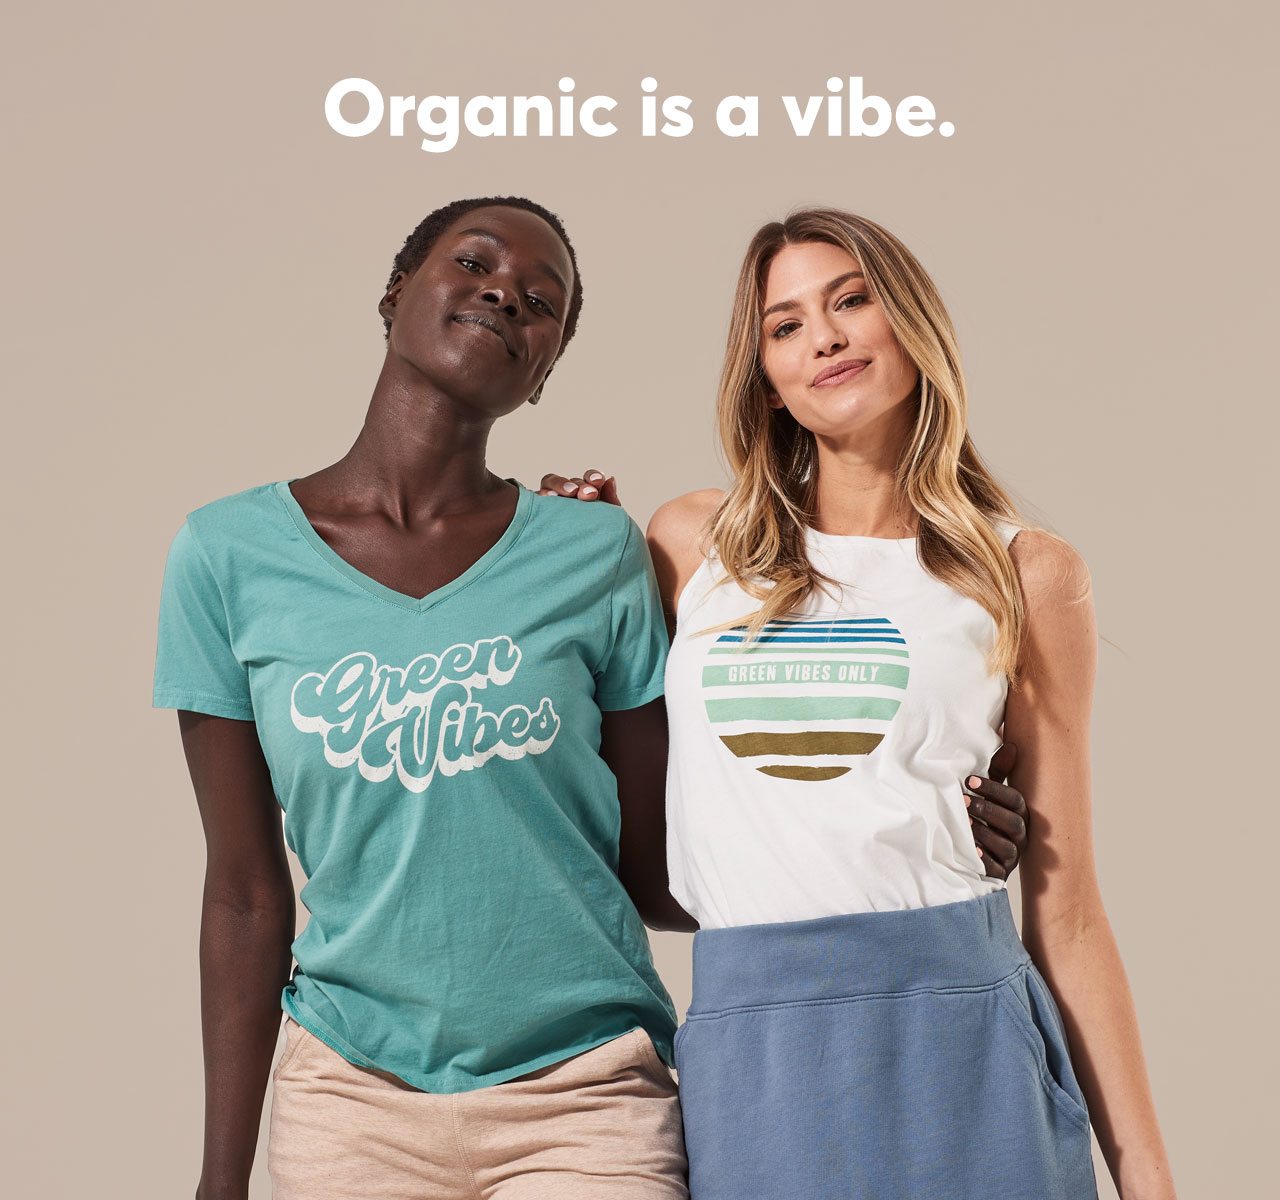 Organic is a vibe.